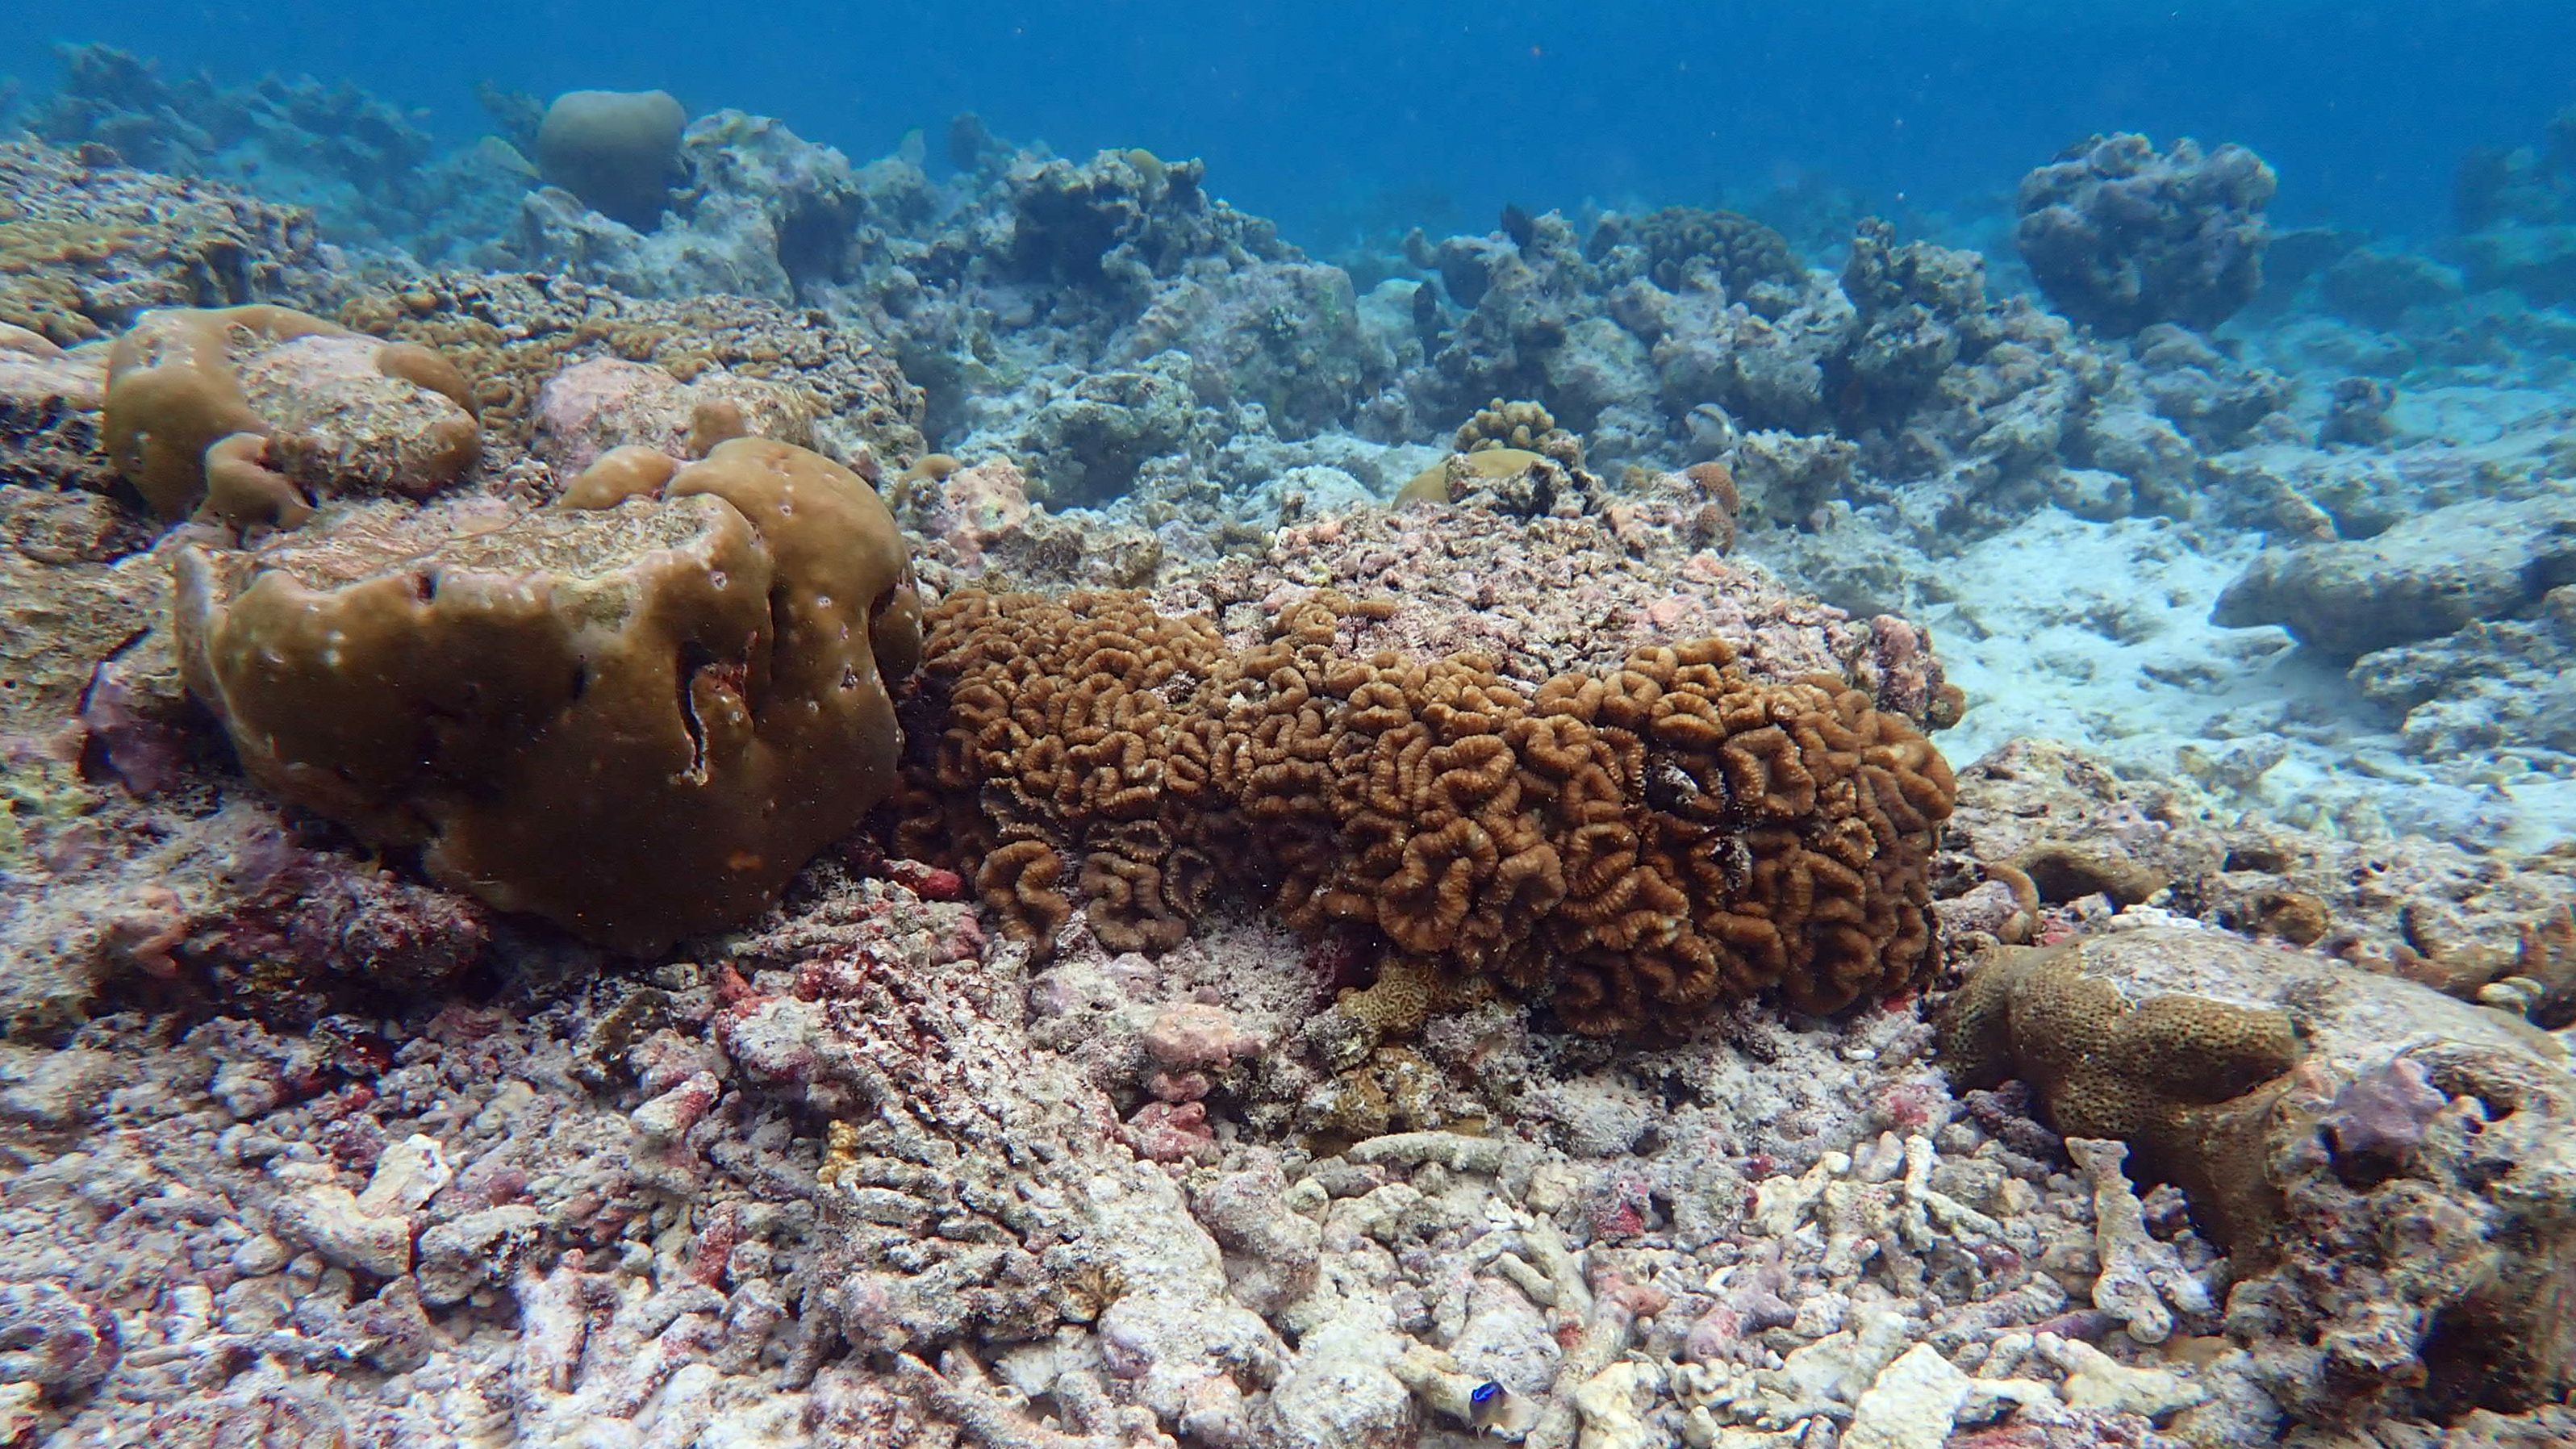 Some parts of the Maldives are believed to have lost up to 90% of corals because of changing conditions, including rising temperature.